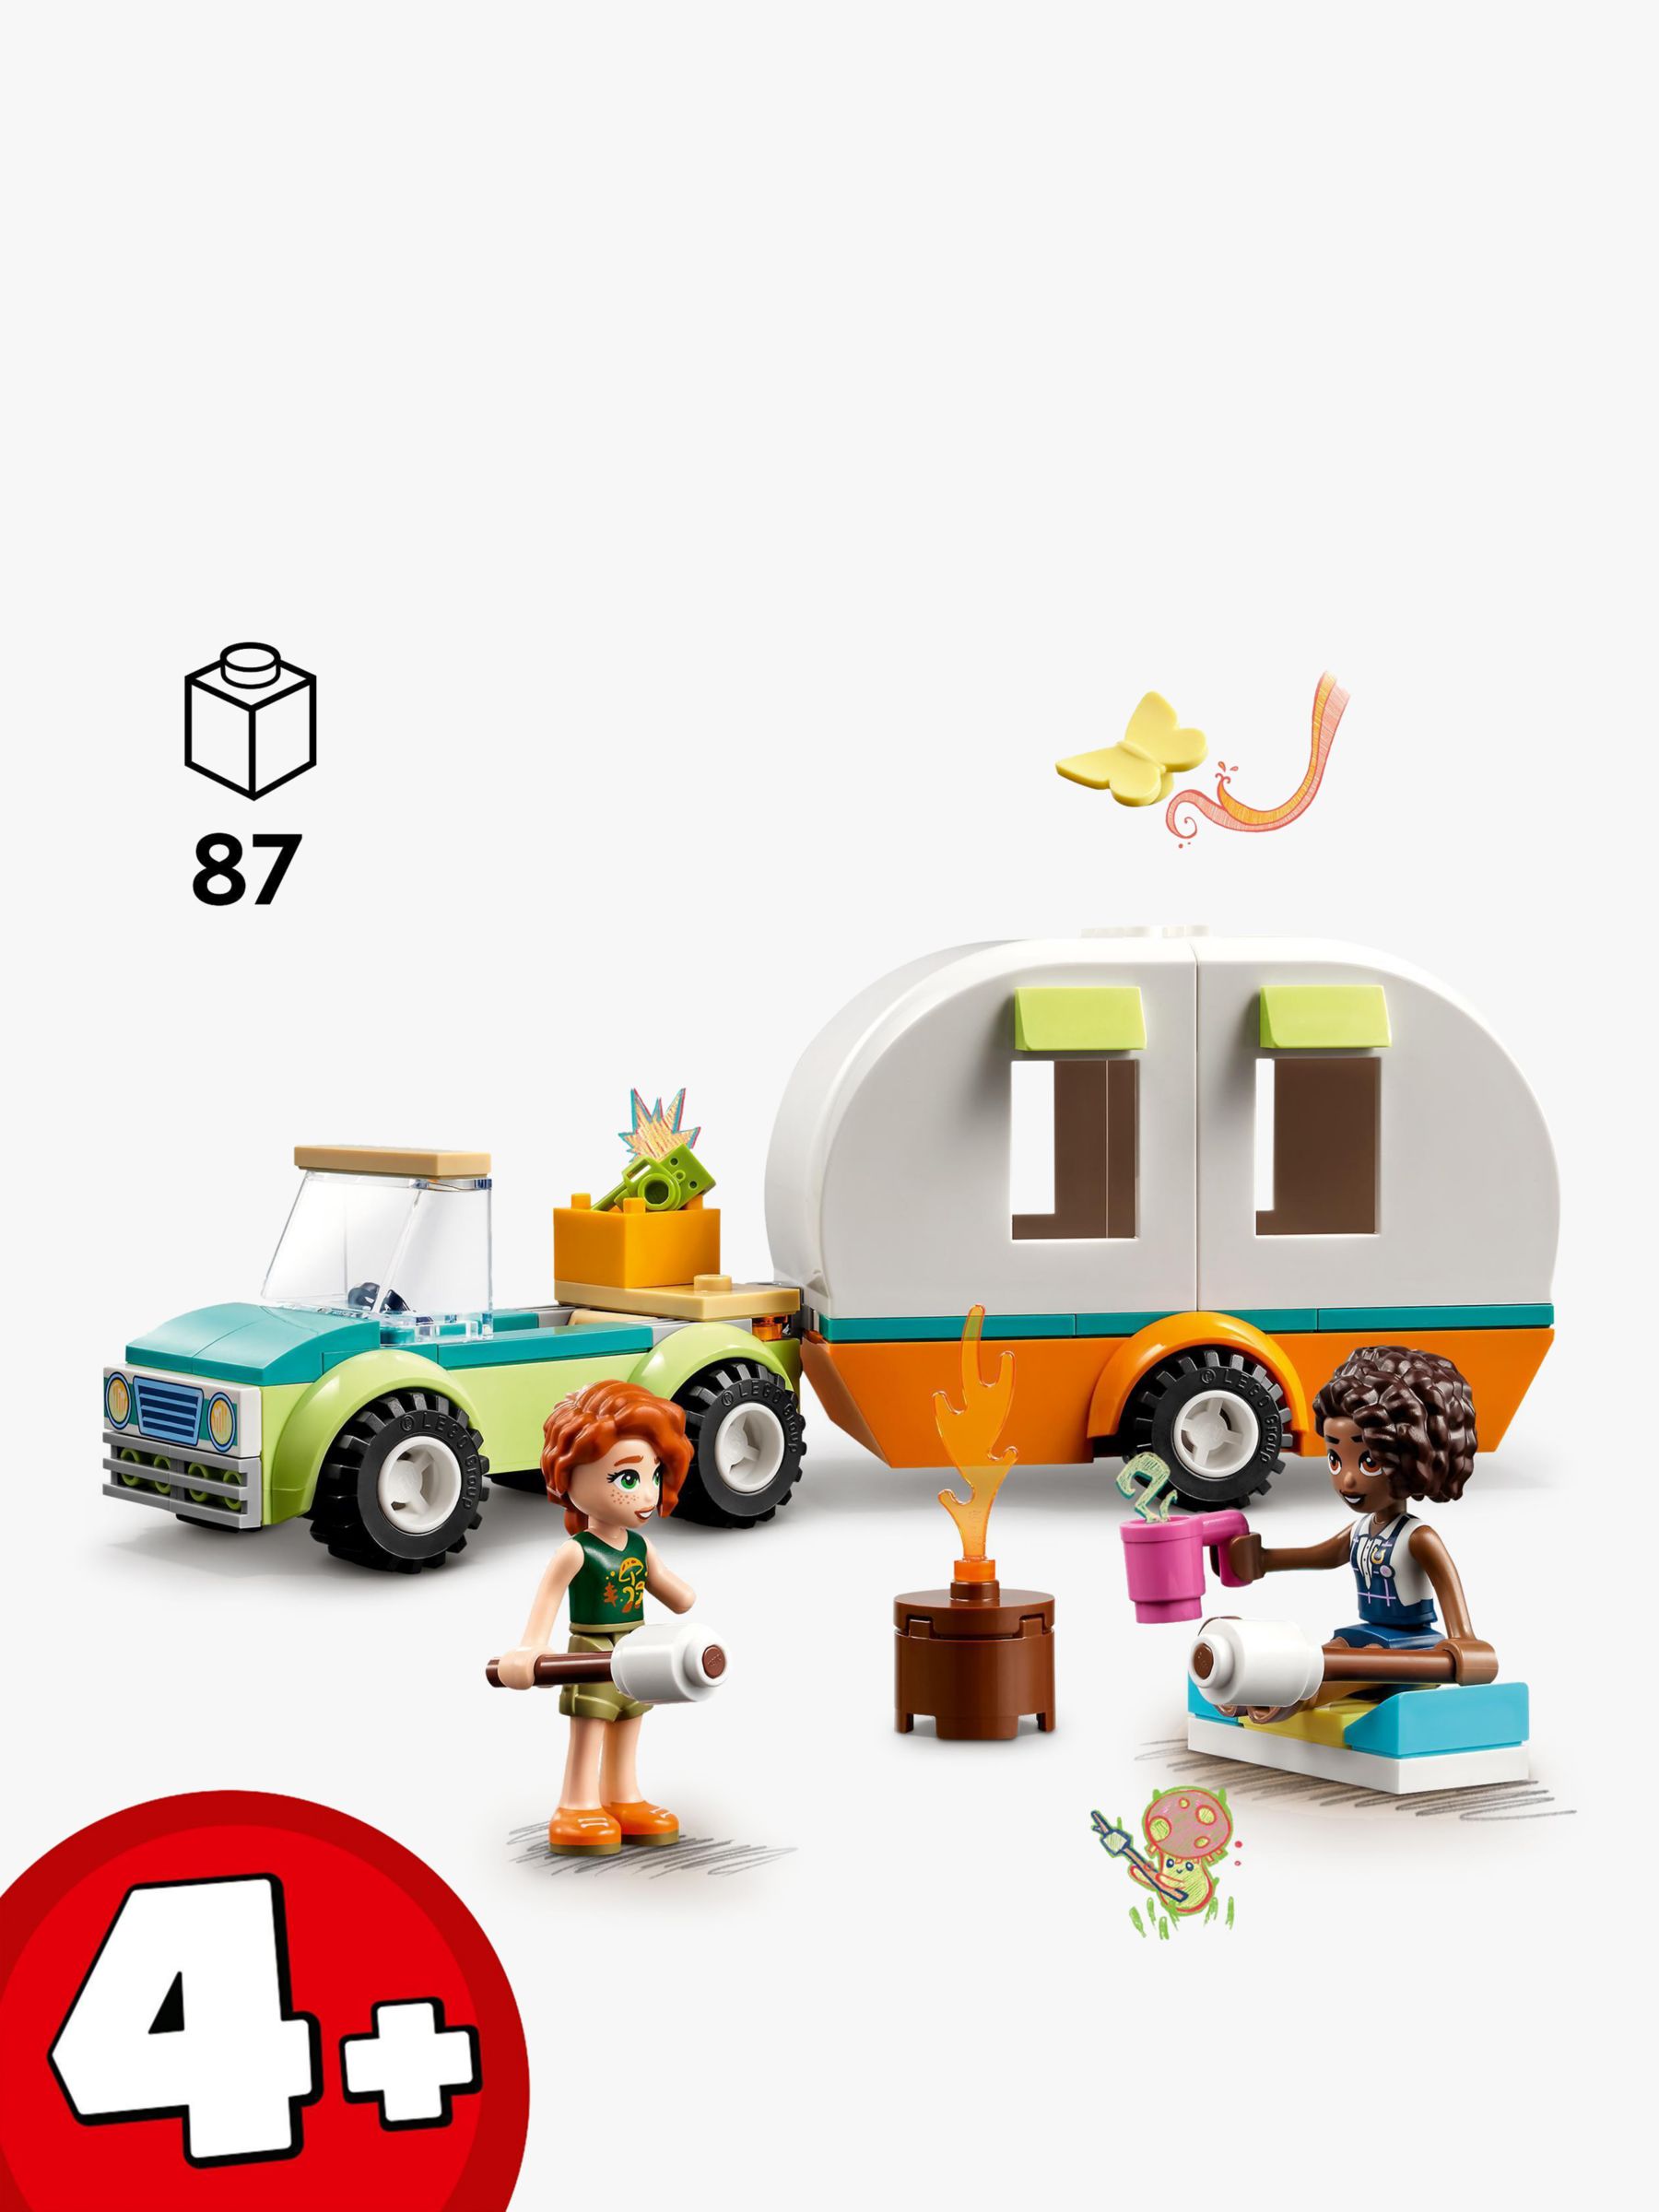 LEGO Friends Holiday Camping Trip